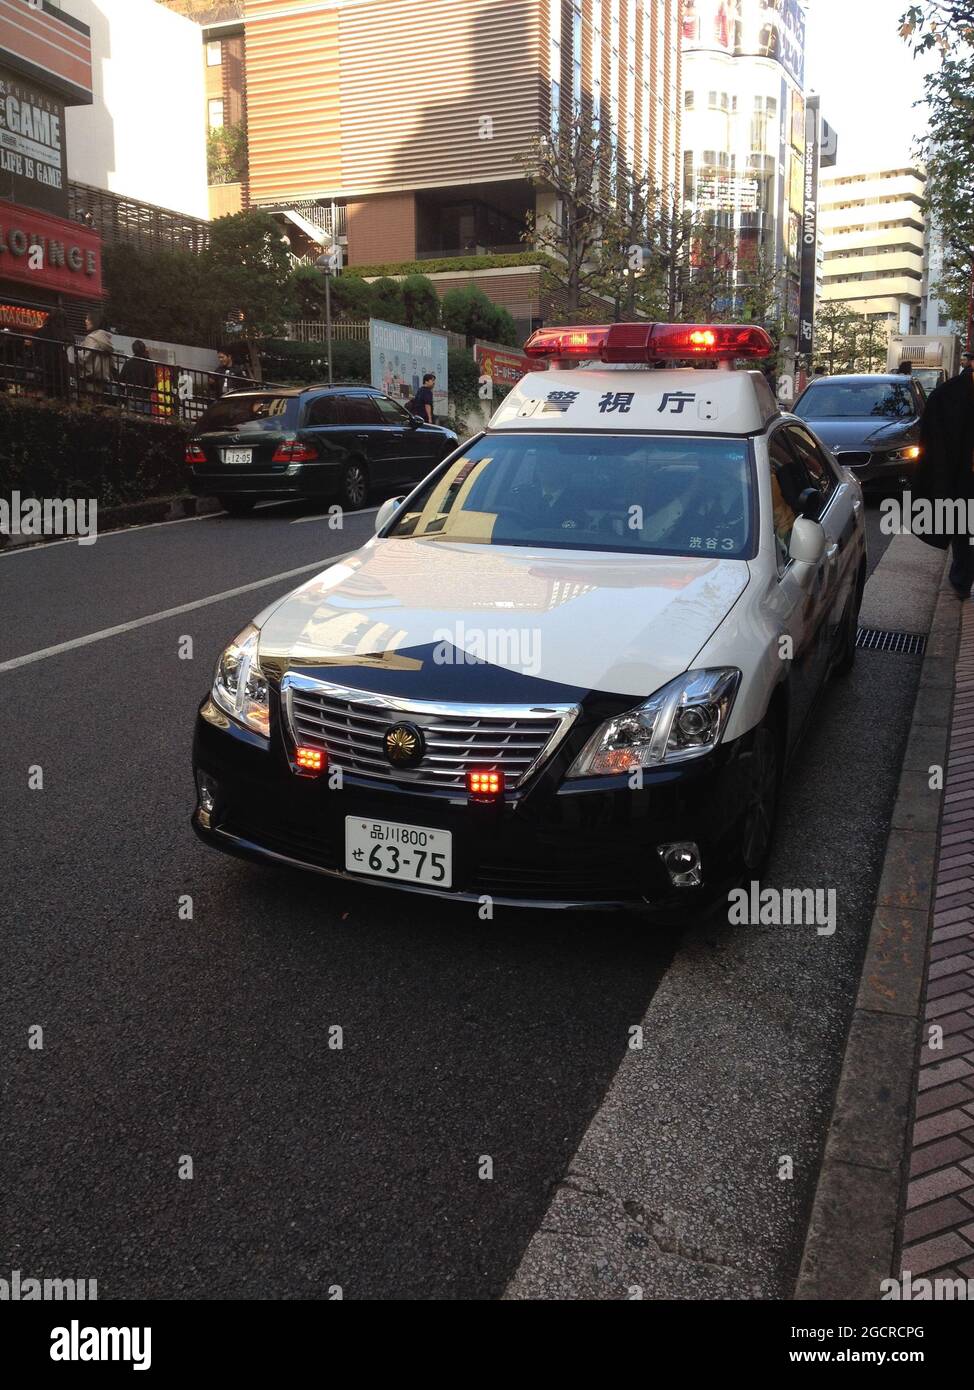 TOKYO, JAPAN - Nov 13, 2013: The Japanese police car in a quiet street in Tokyo, Japan Stock Photo